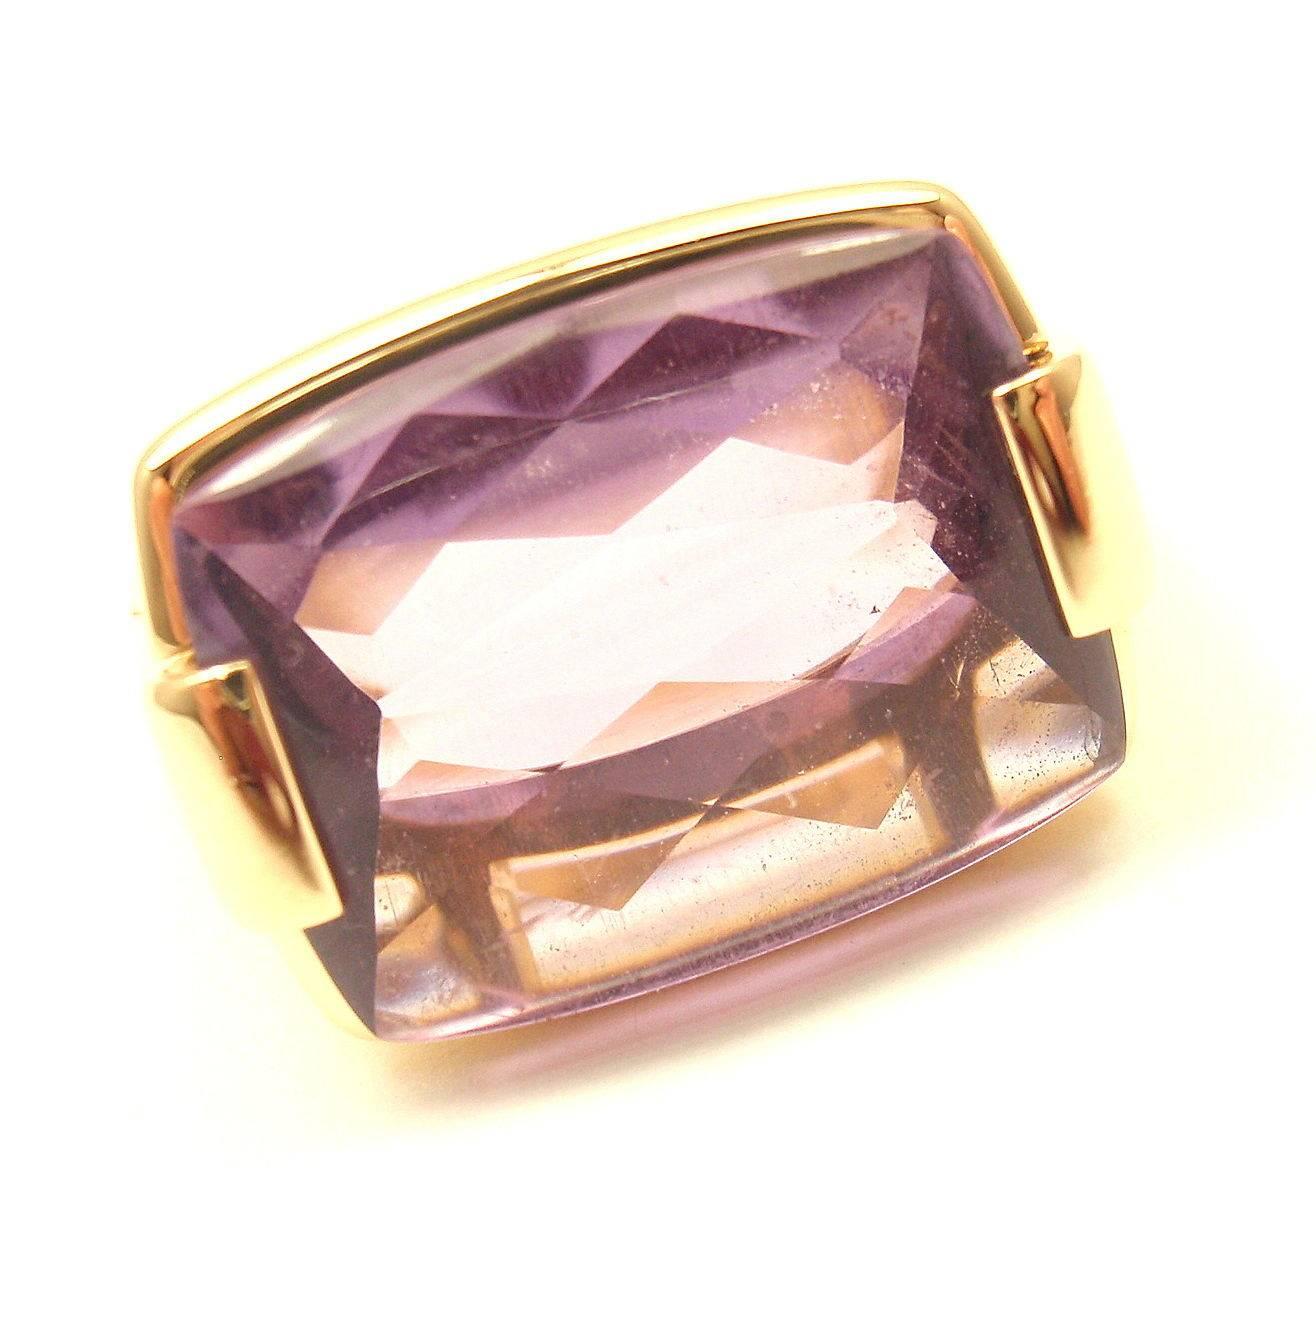 18k Yellow Gold Large Amethyst Ring by Bulgari.  
With 1 Amethyst 16 x 13mm
Description: 
Ring Size: 7.75 (resize available) 
Width: 14mm 
Weight: 12.4grams 
Stamped Hallmarks: Bvlgari, 750 Italy 

*Free Shipping within the United States*